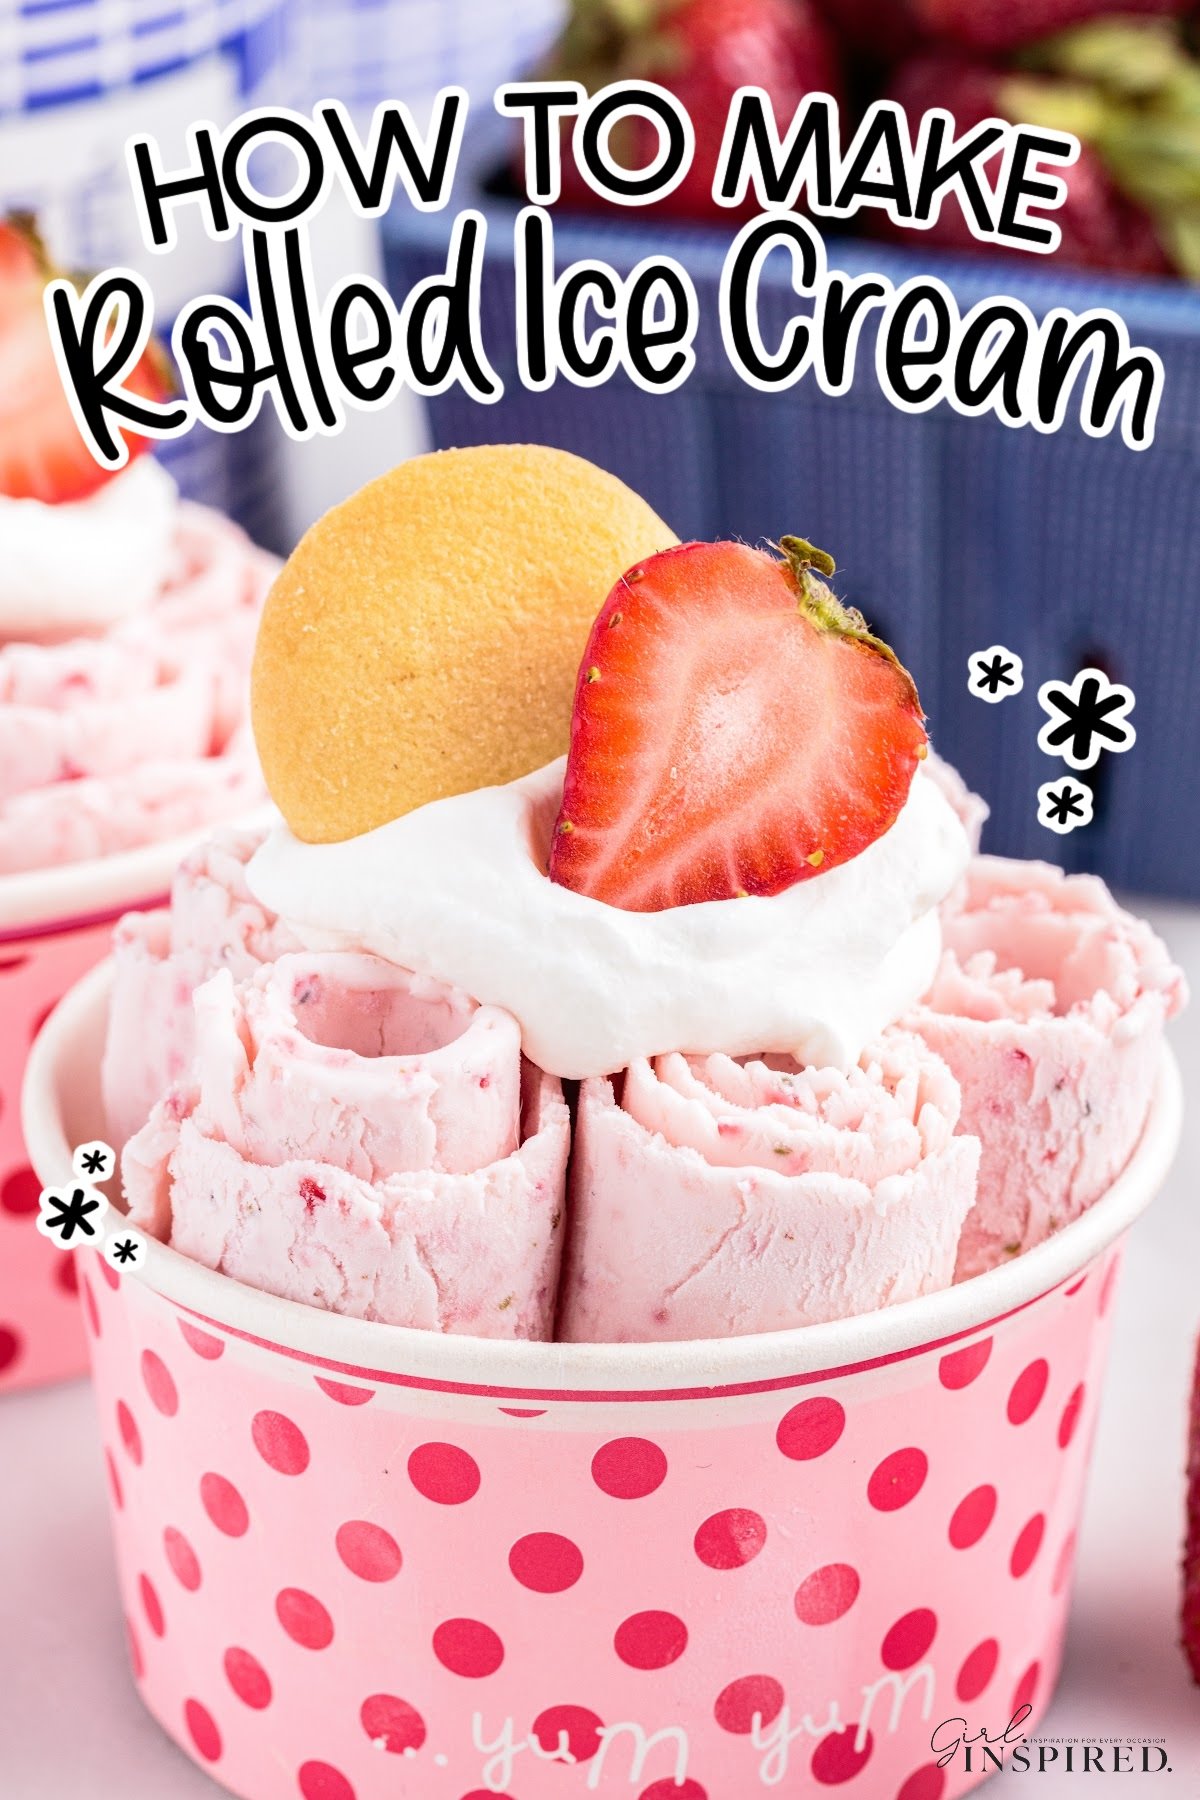 Pink polka dot cup with strawberry rolled ice cream, whipped cream, a strawberry, and a cookie on top with blue berry basket in background and text overlay "how to make rolled ice cream."